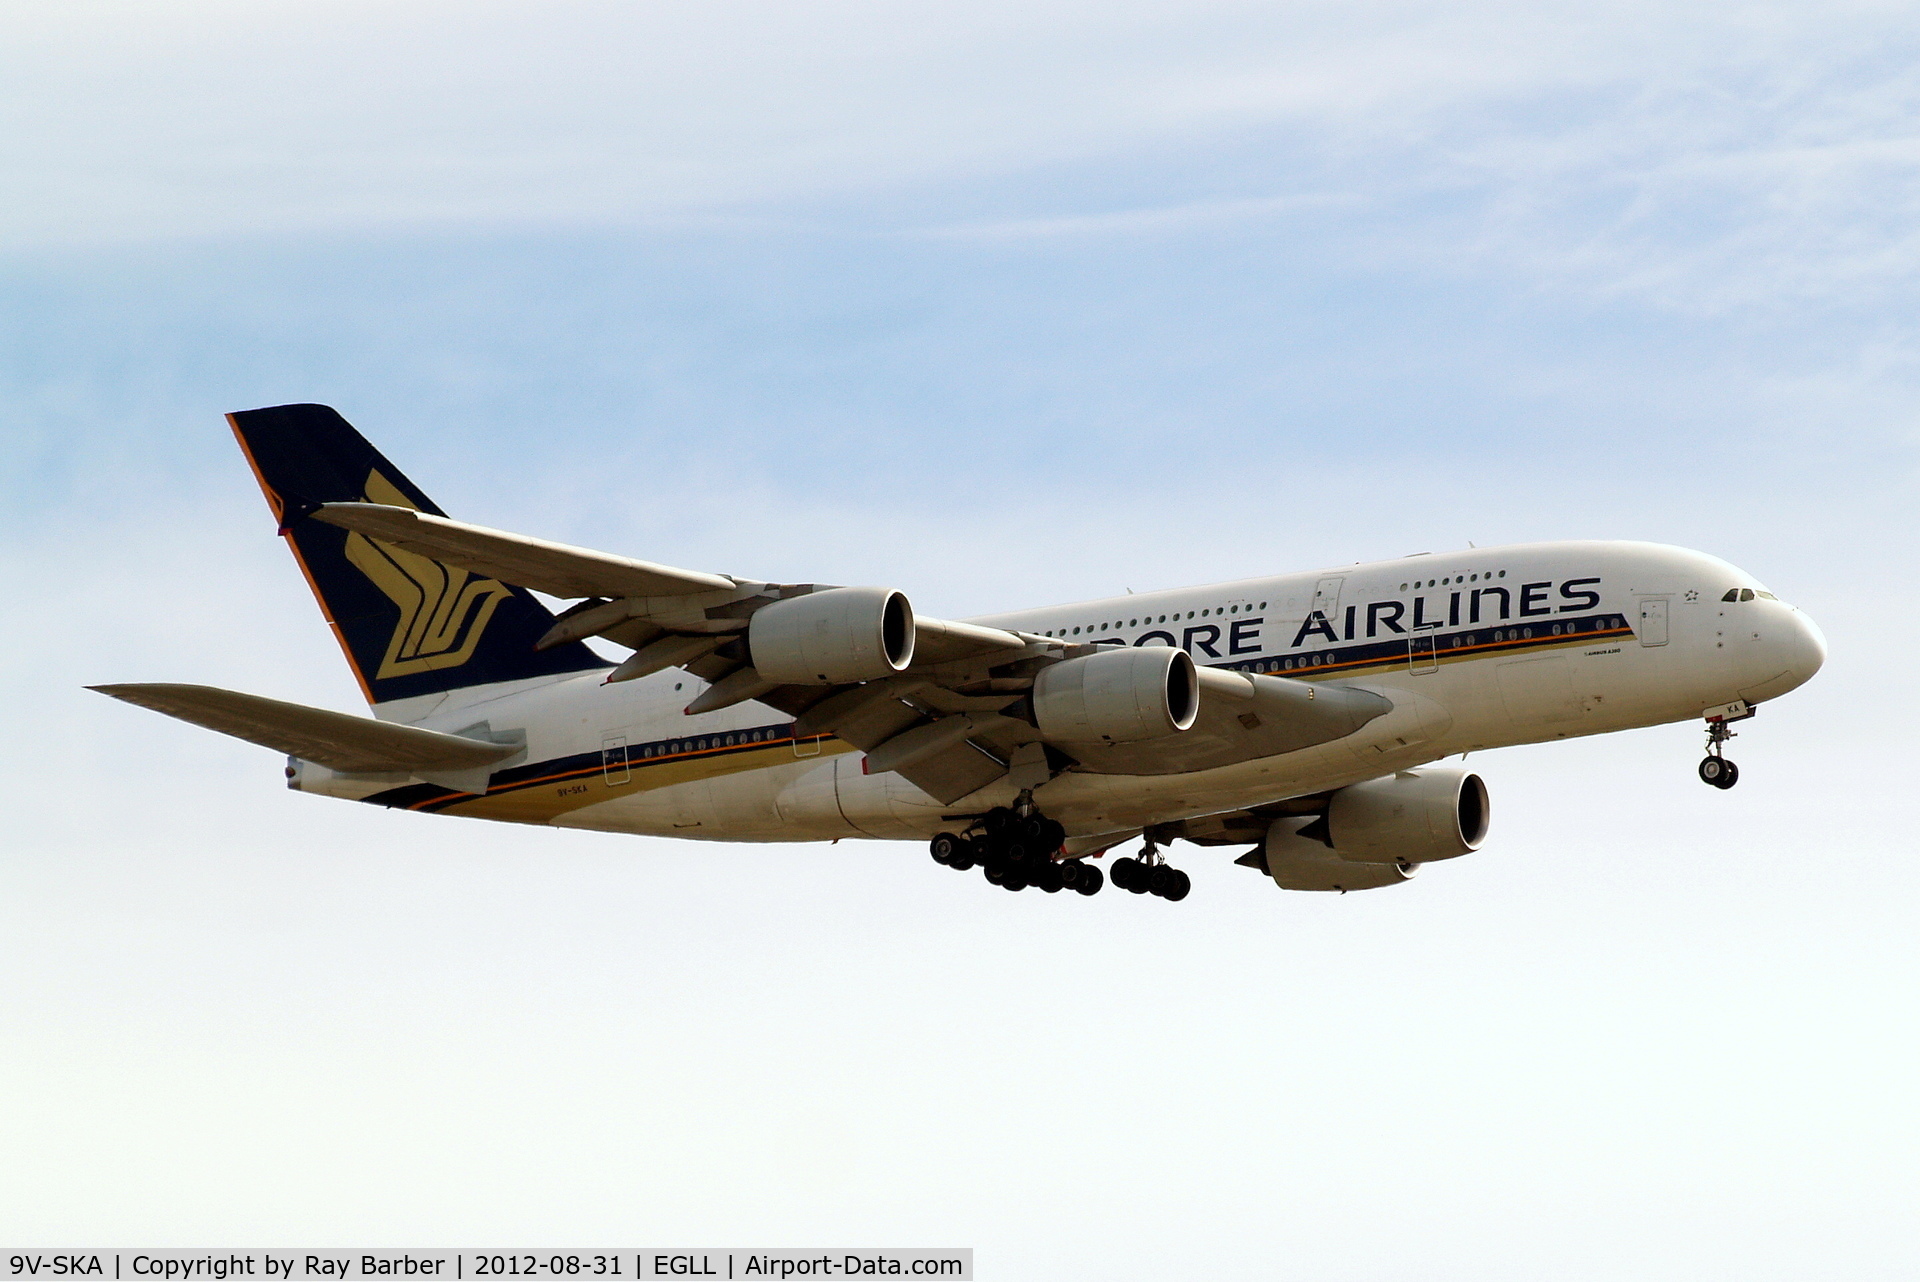 9V-SKA, 2007 Airbus A380-841 C/N 003, Airbus A380-841 [003] (Singapore Airlines) Home~G 31/08/2012. On approach 27L.